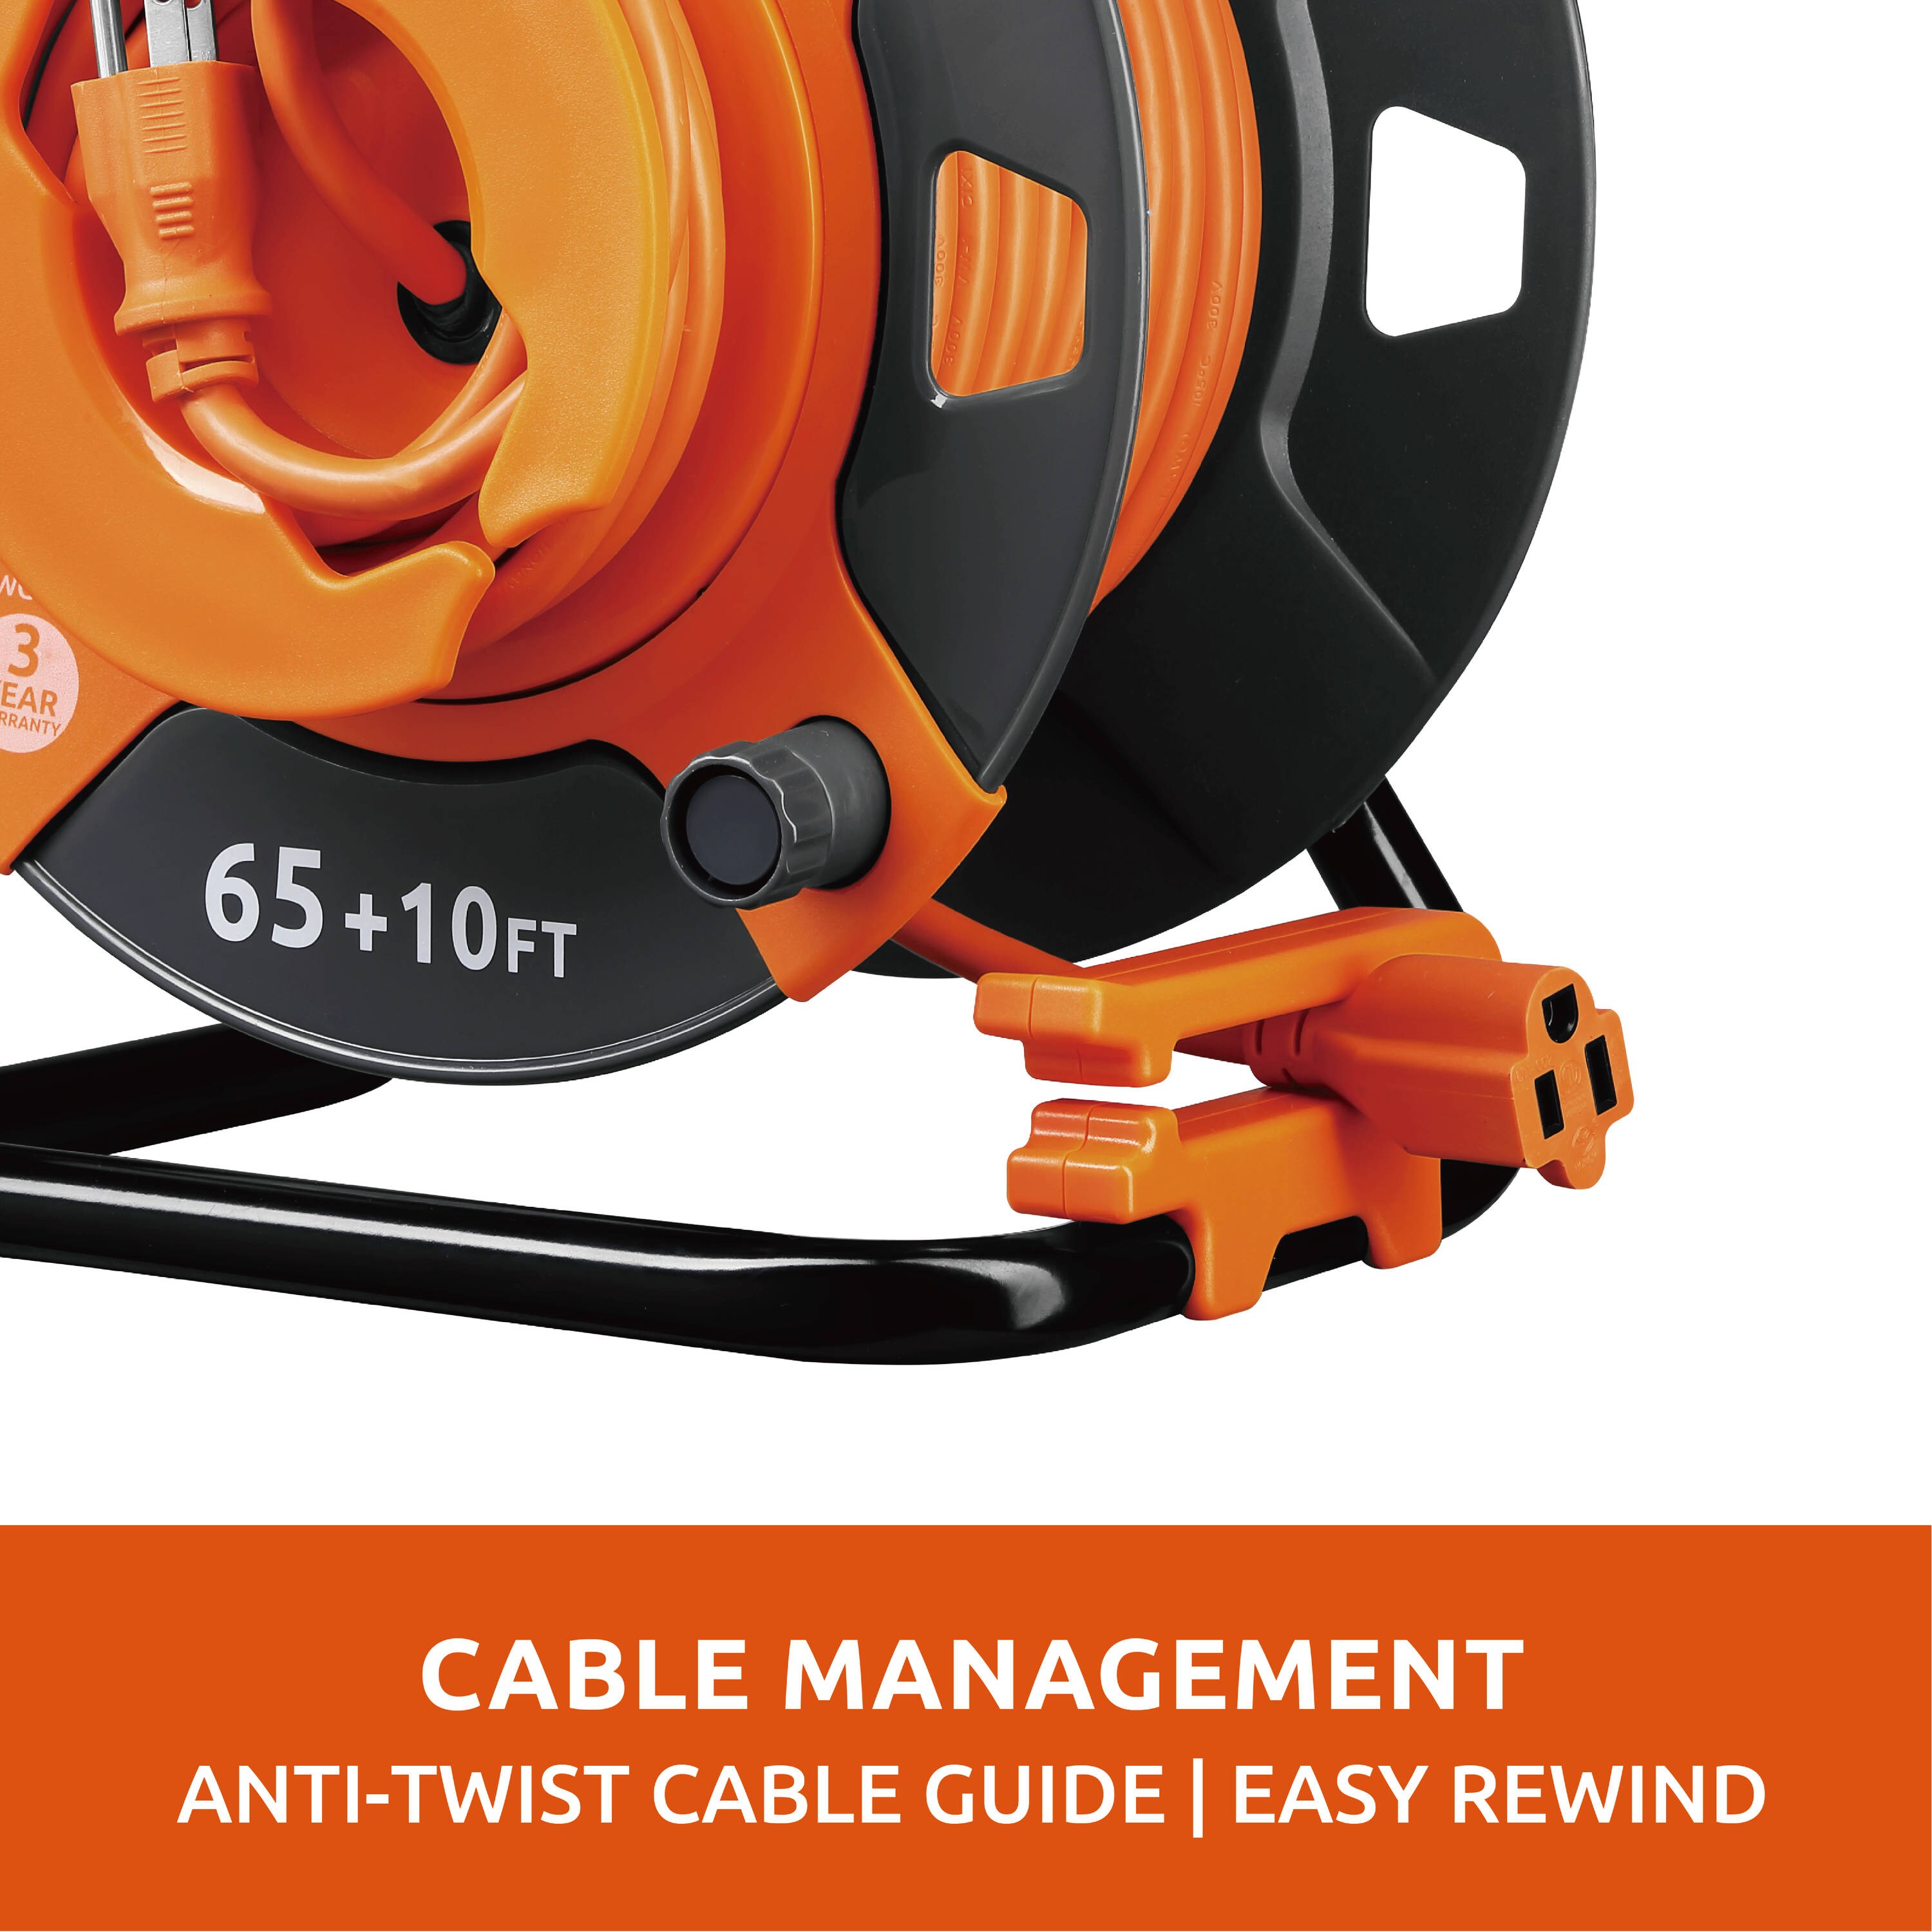 Have a question about Link2Home 75 ft. 12/3 Extension Cord Storage